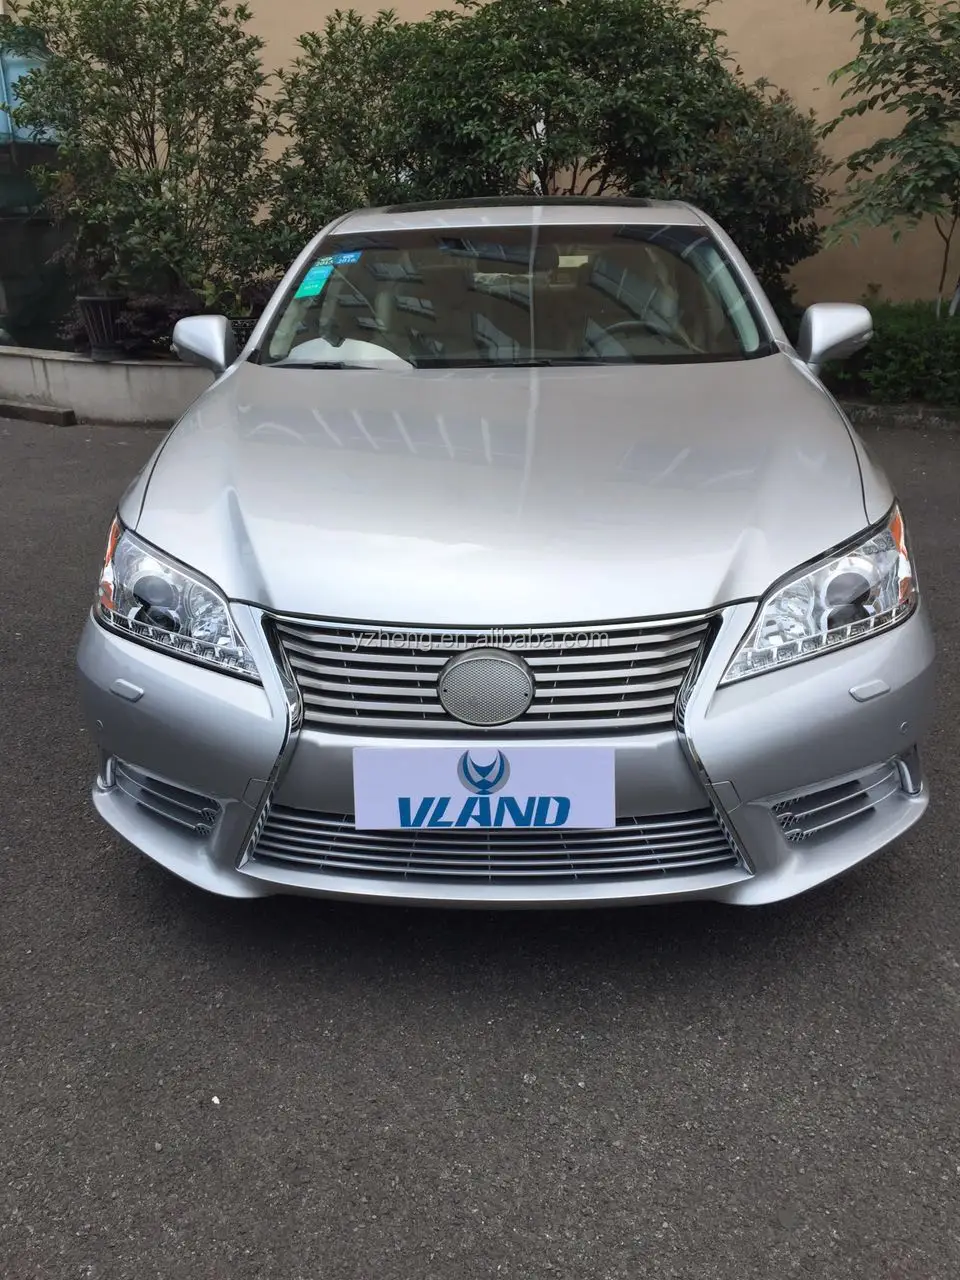 VLAND Factory Car Headlight For Lexus ES350 2007-2012 LED Head Lamp Plug And Play With Wholesale Price